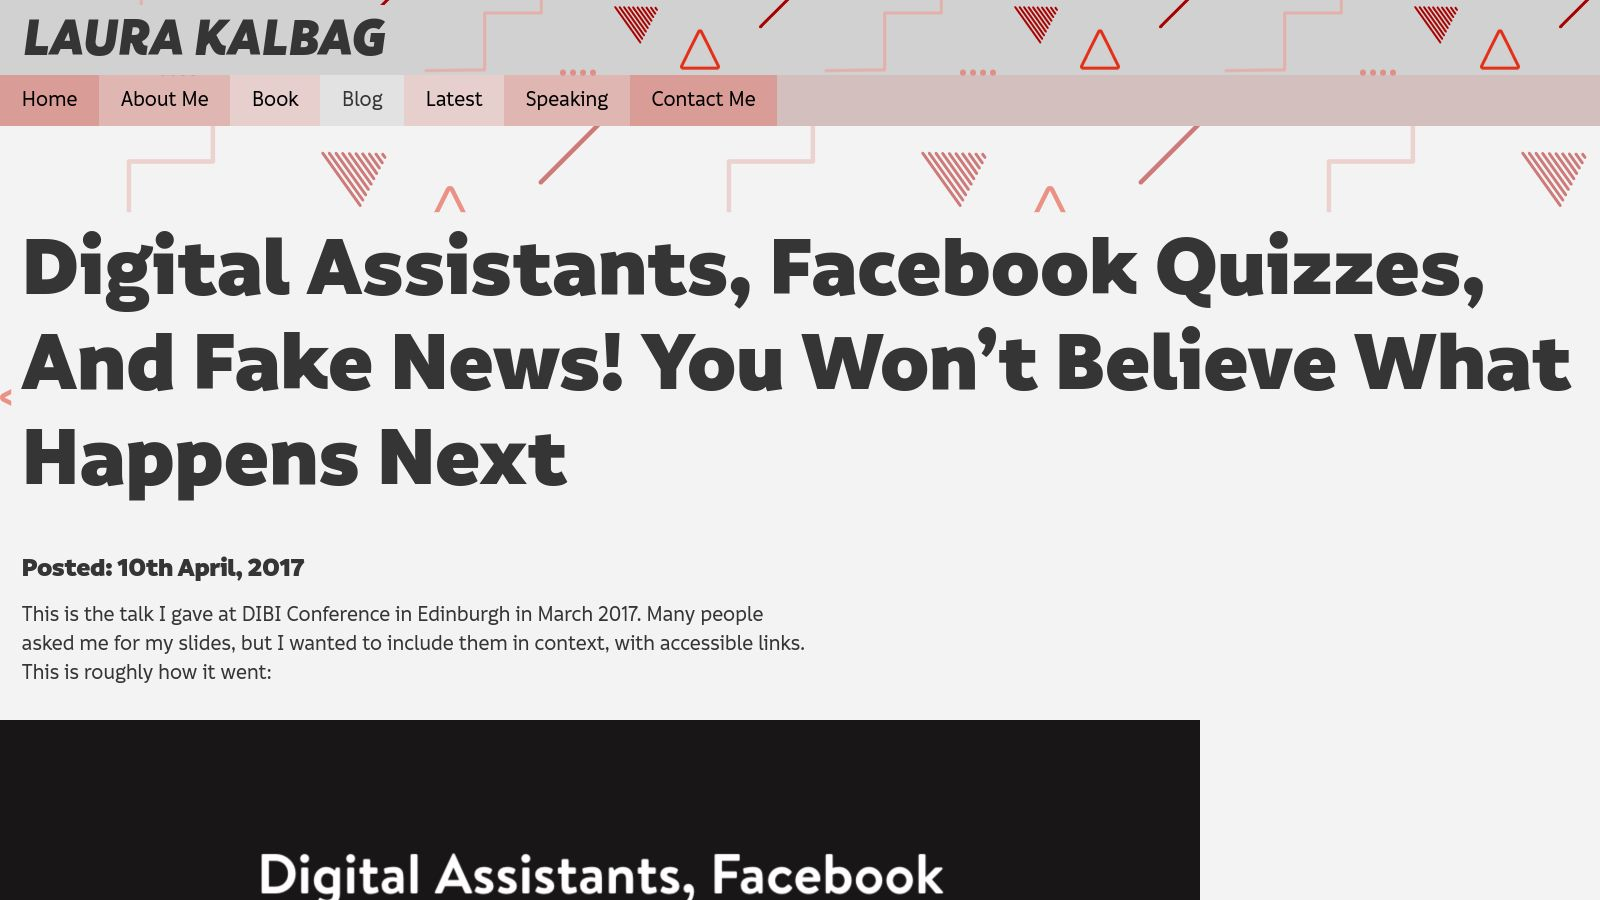 Digital Assistants, Facebook Quizzes, And Fake News! You Won’t Believe What Happens Next